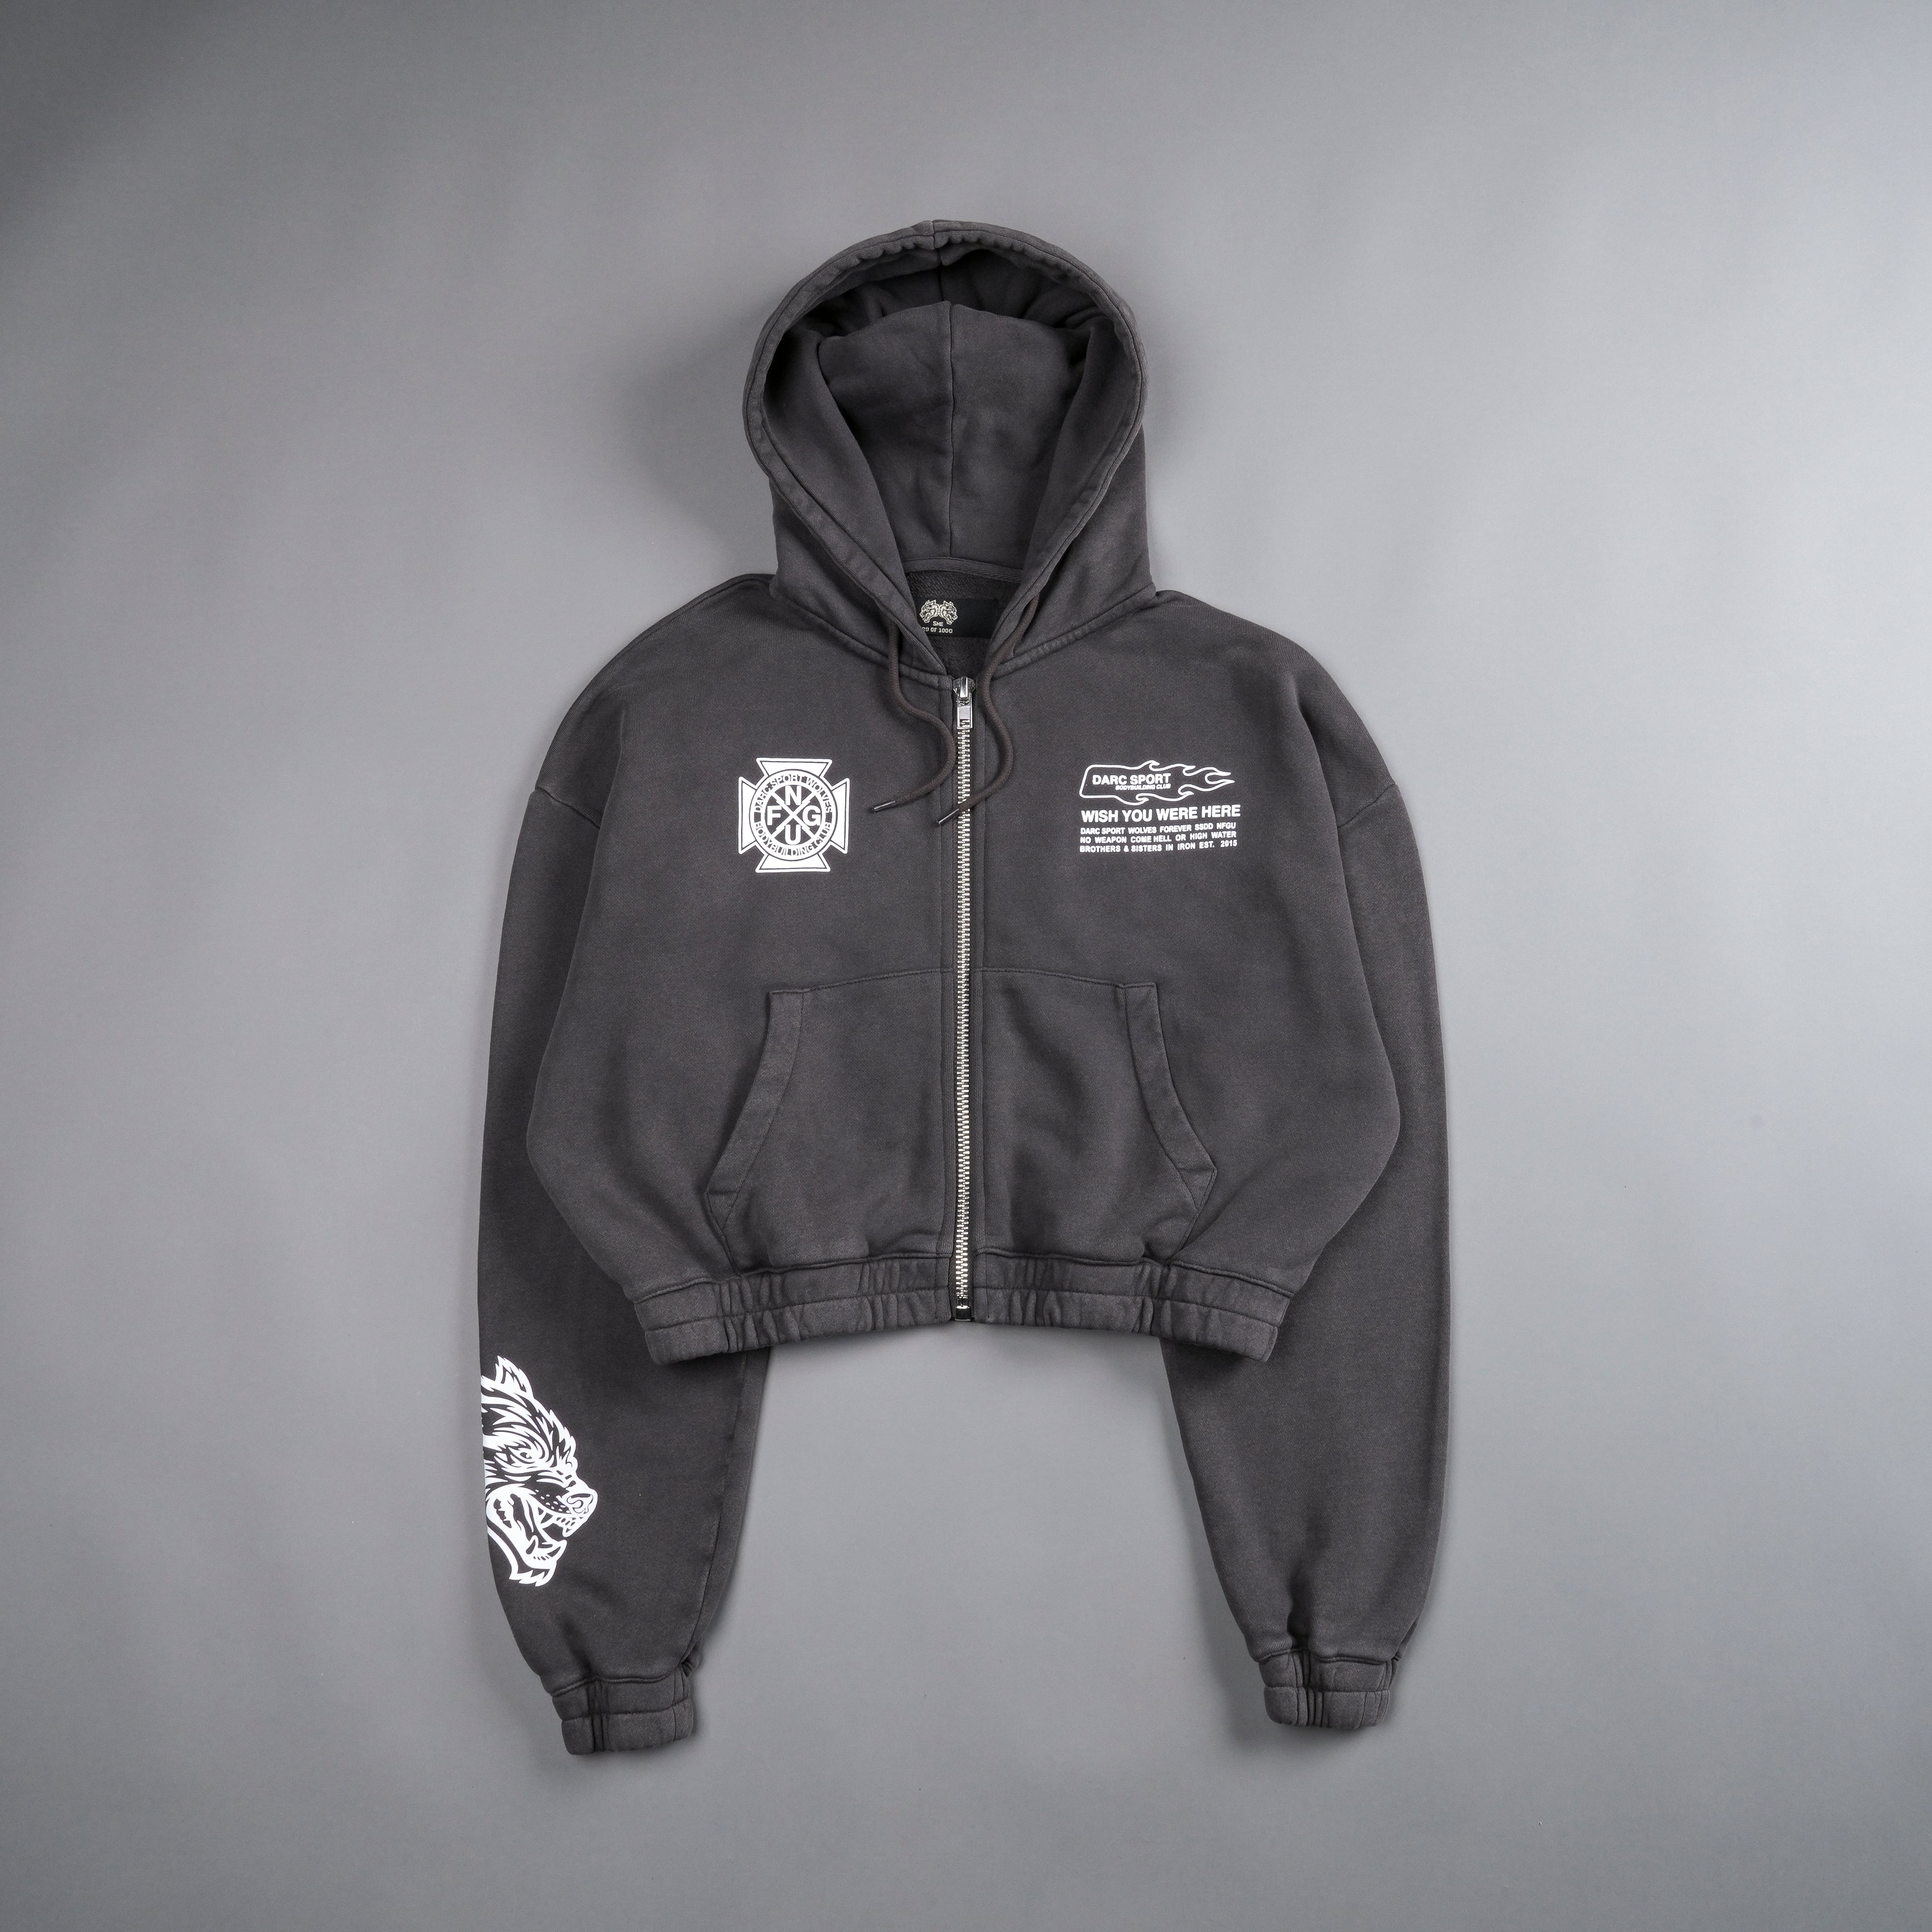 Stairs "Chambers" (Cropped) Zip Hoodie in Wolf Gray